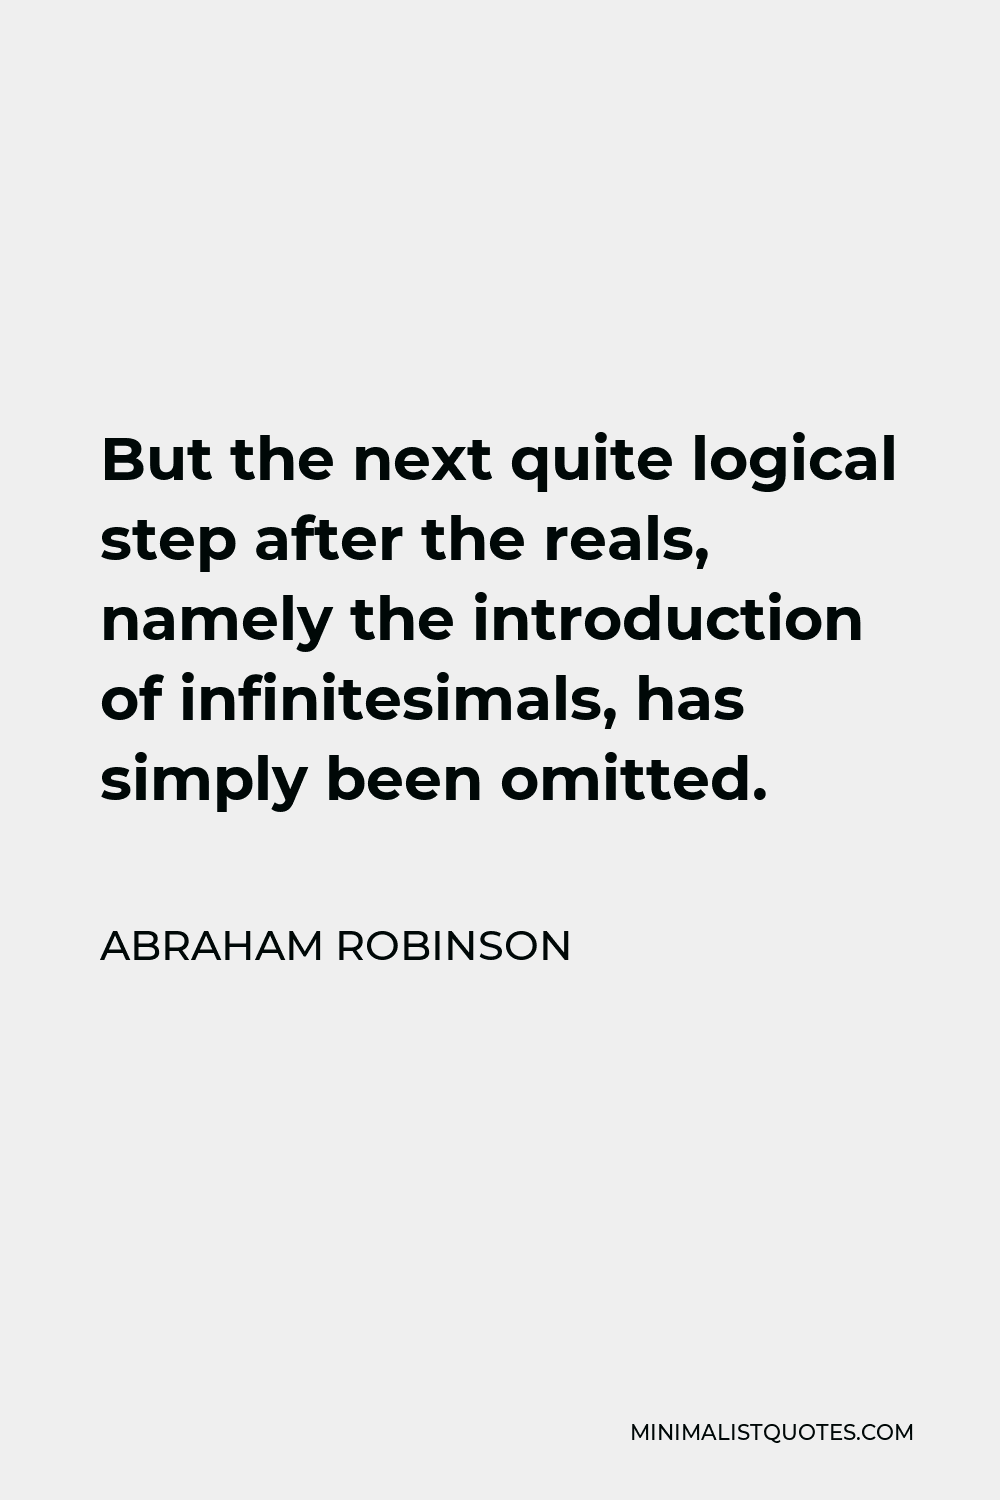 Abraham Robinson Quote - But the next quite logical step after the reals, namely the introduction of infinitesimals, has simply been omitted.